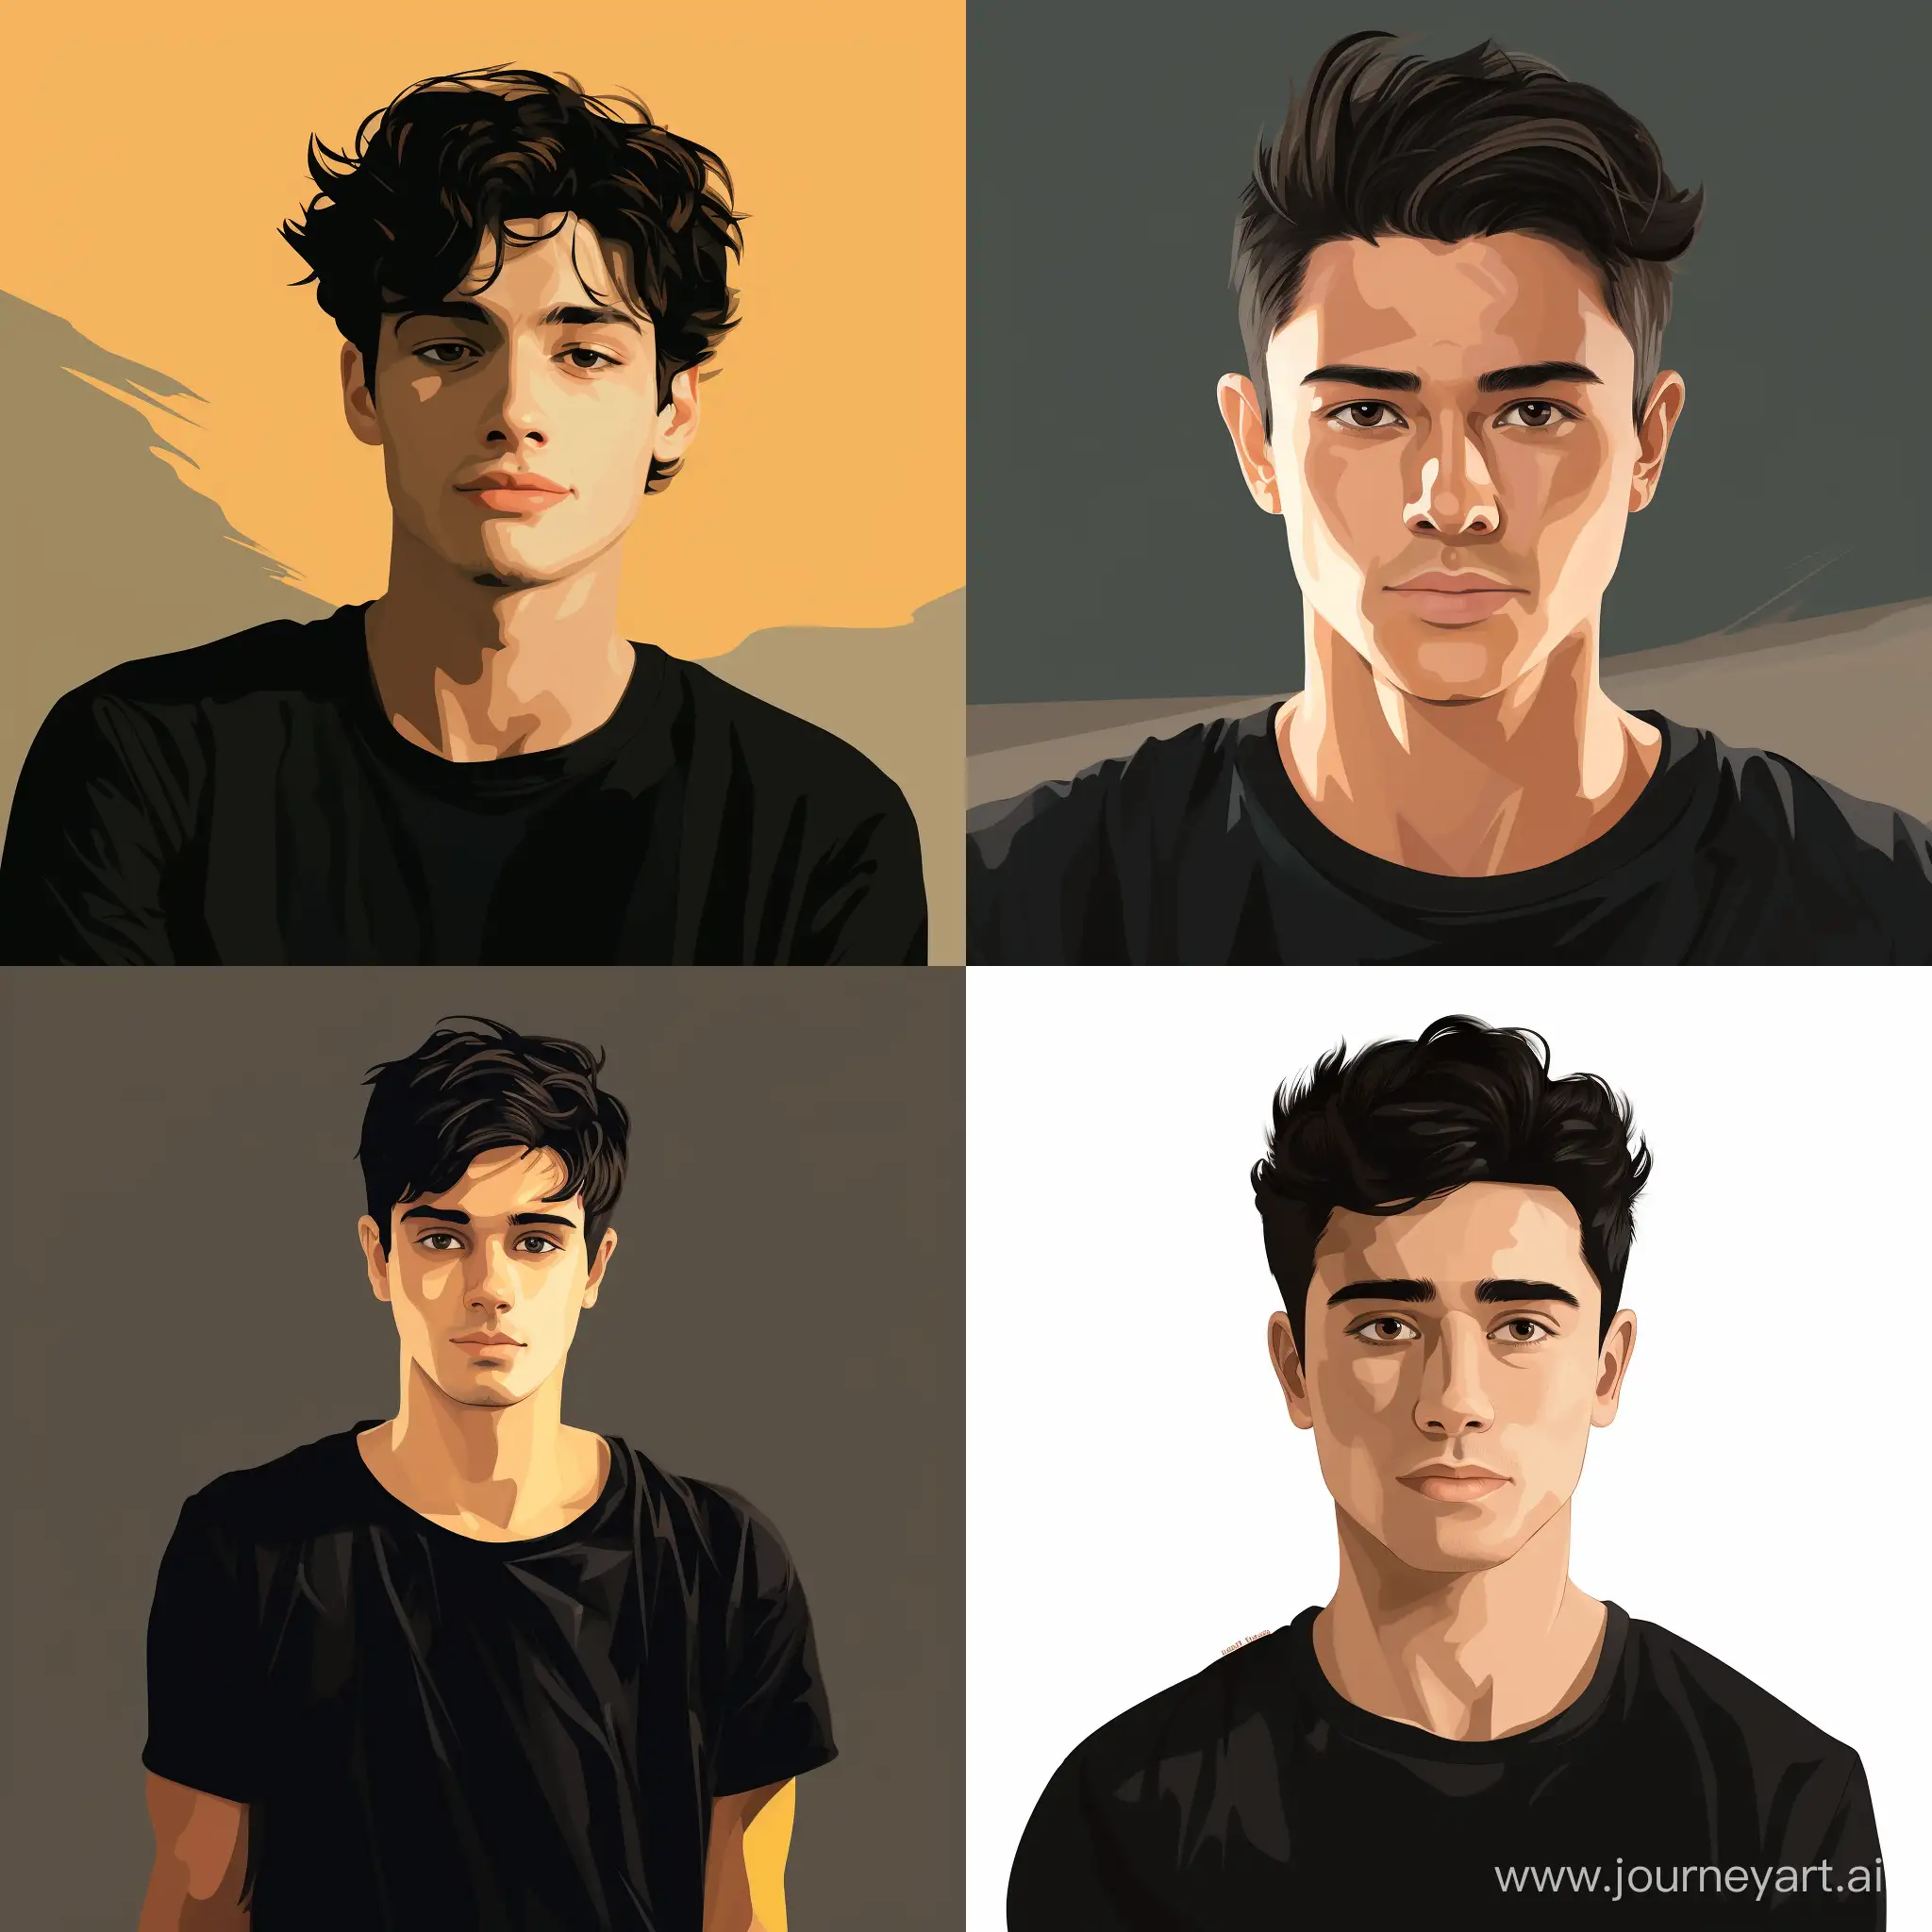 Energetic-21YearOld-with-Striking-Black-Eyes-and-Hair-Contemporary-Portrait-in-One-Direction-Style